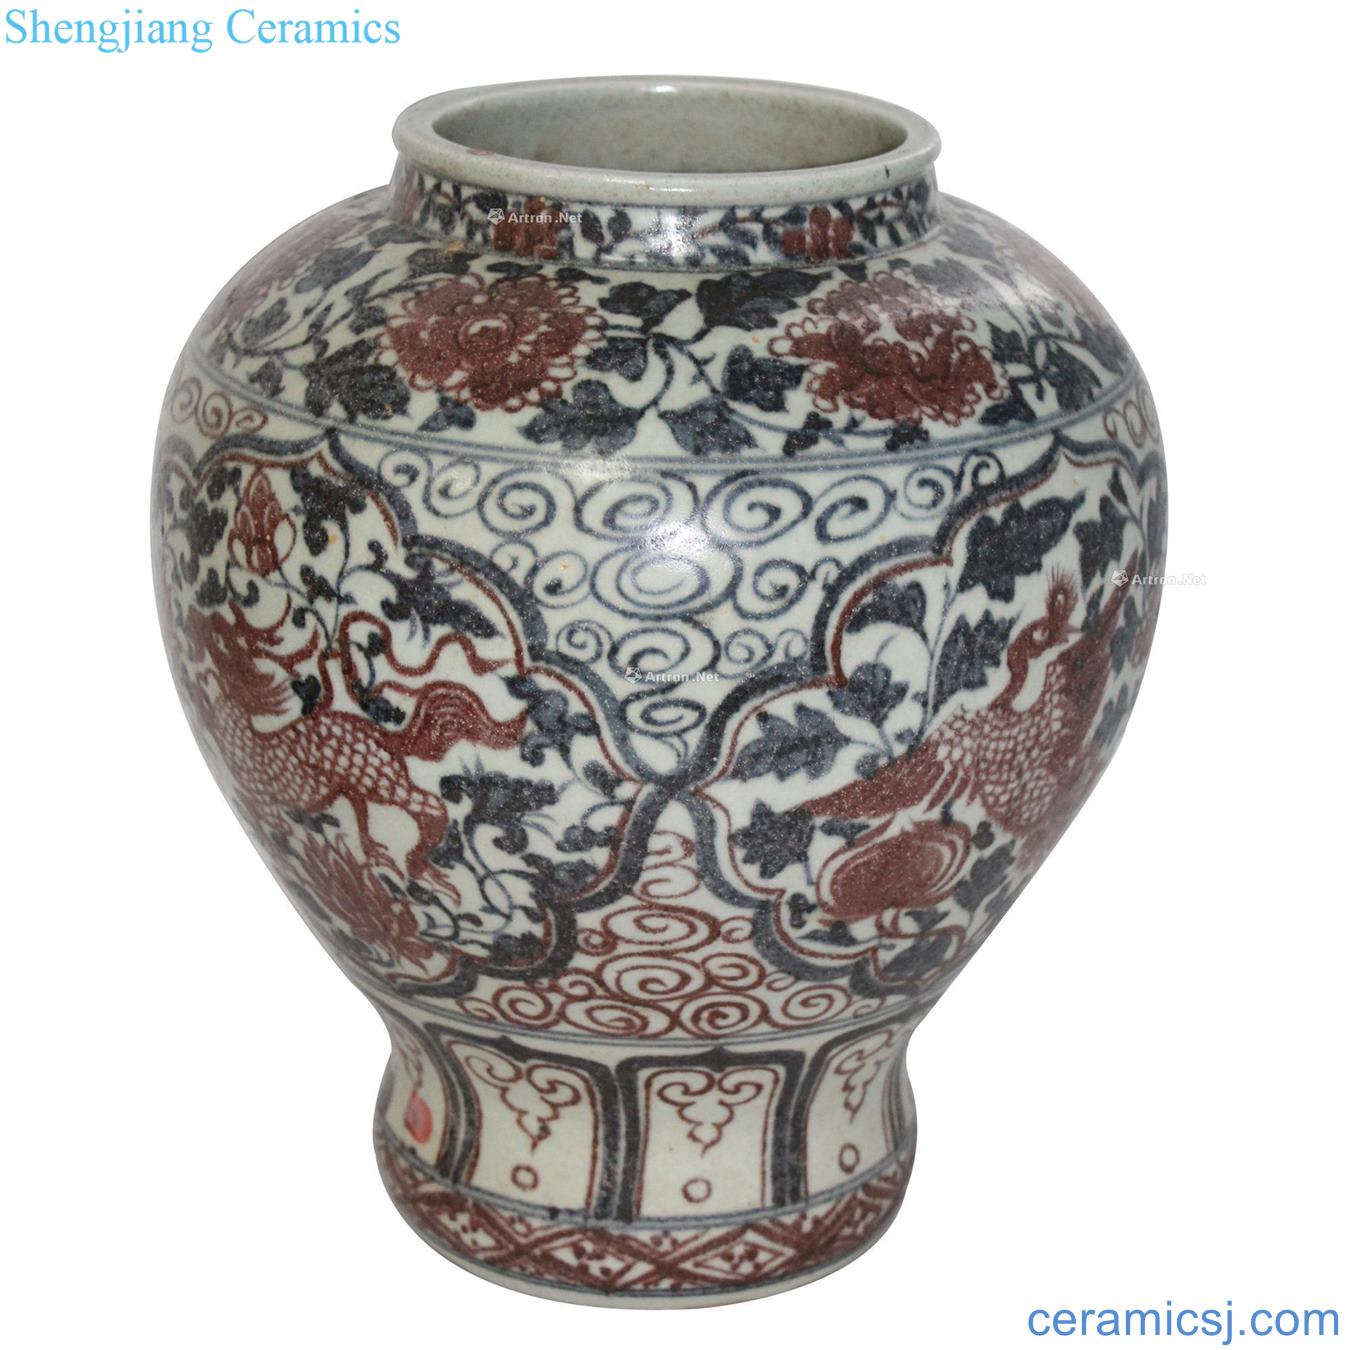 The yuan dynasty Blue and white youligong tangled branches large pot of flowers